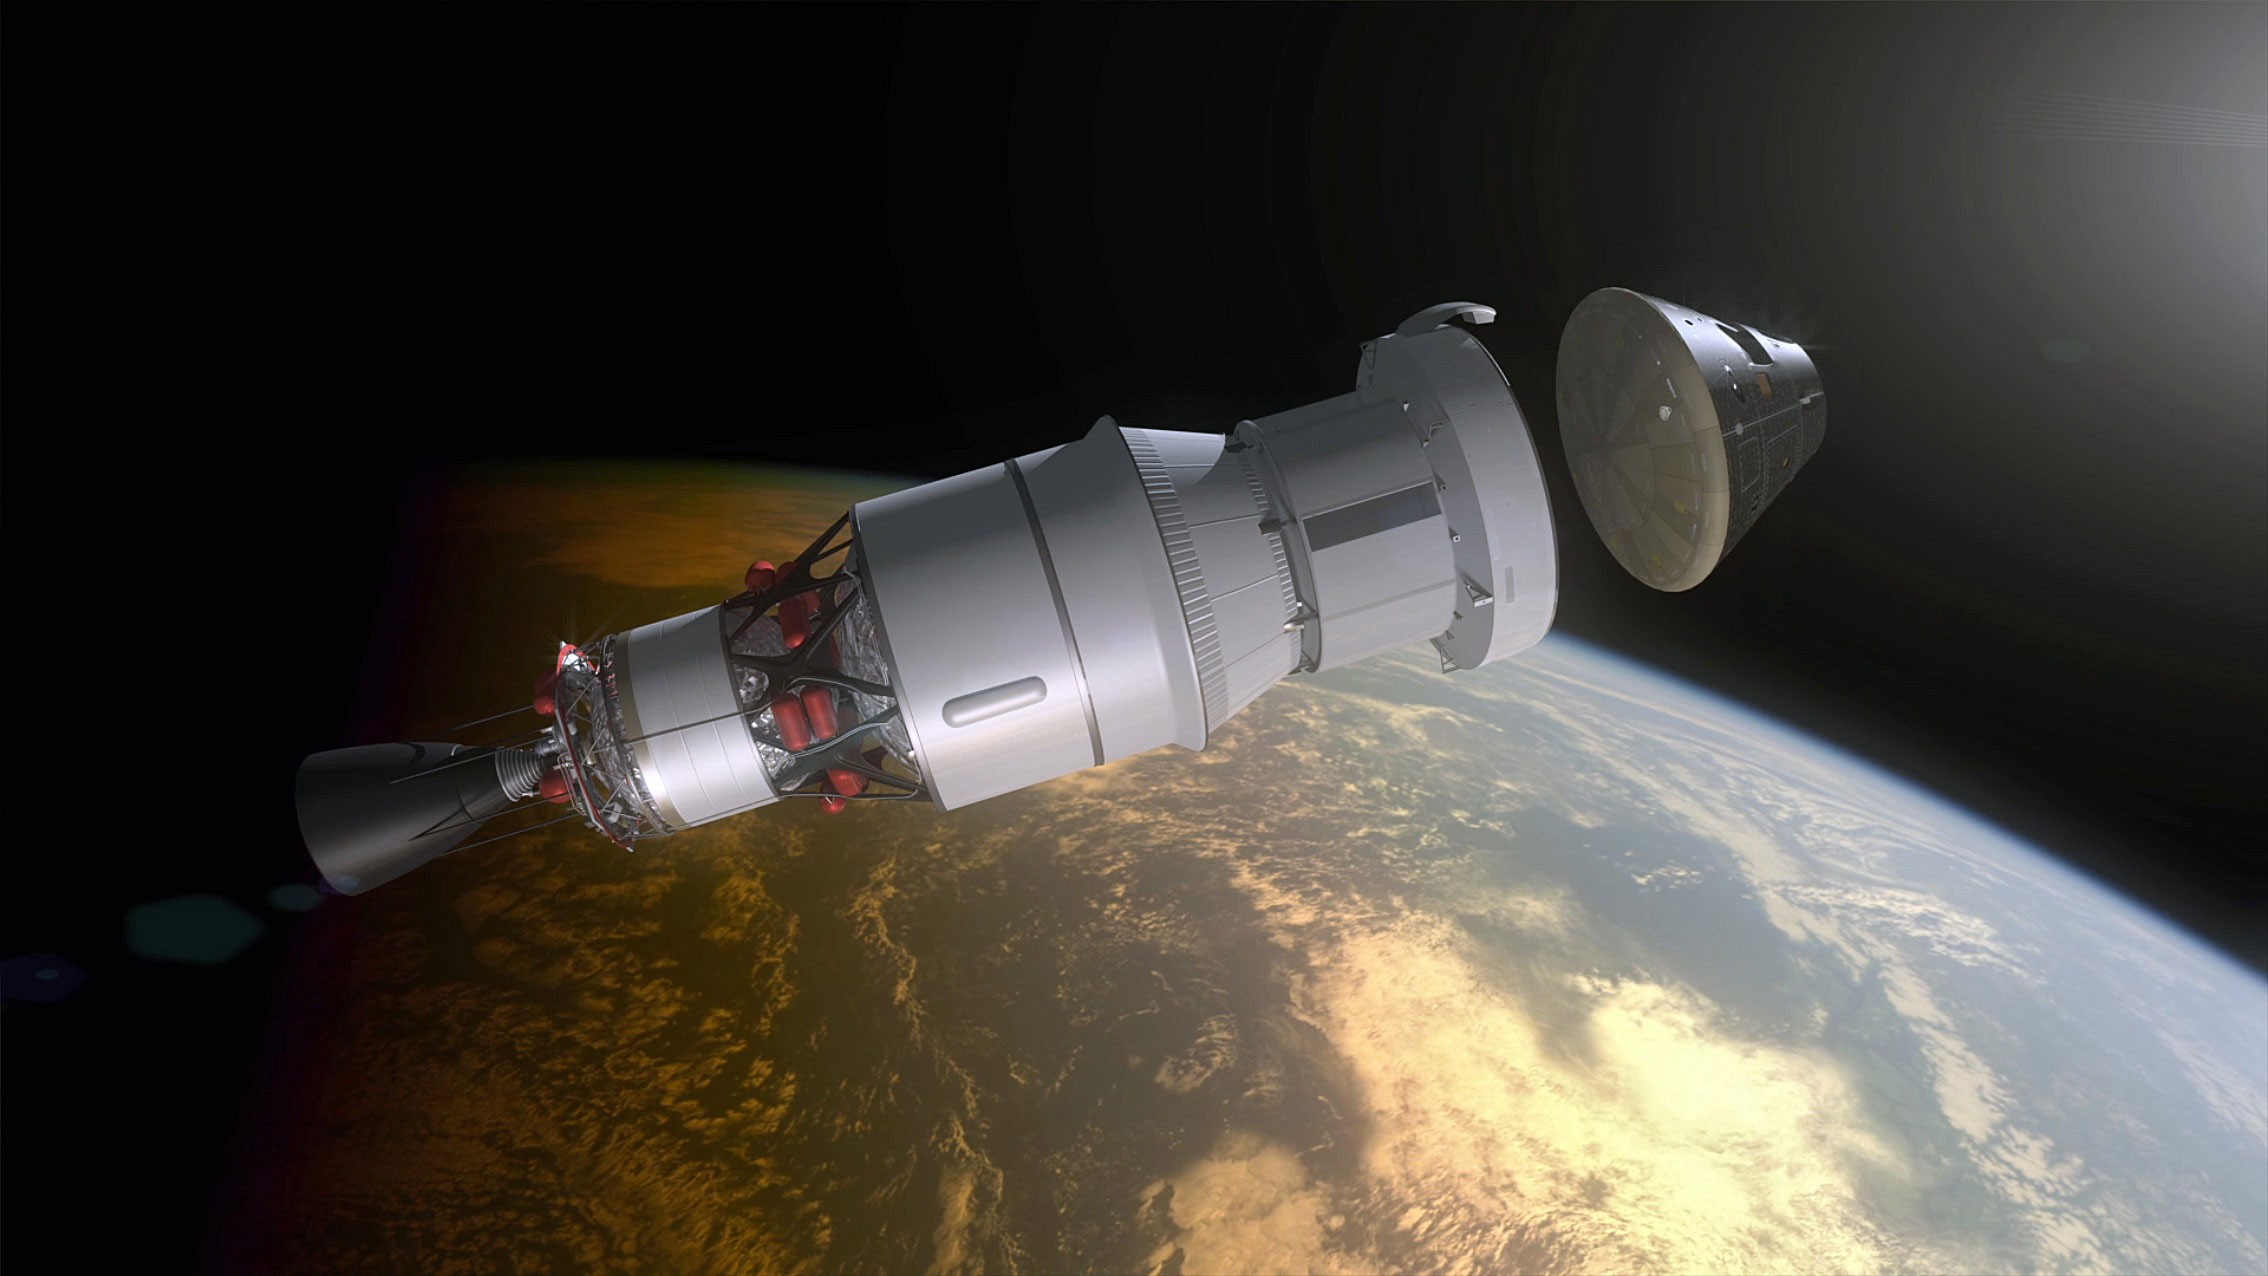 Artist’s rendering of the Orion capsule as it separates from the Service Module during its upcoming test flight. Credit: NASA